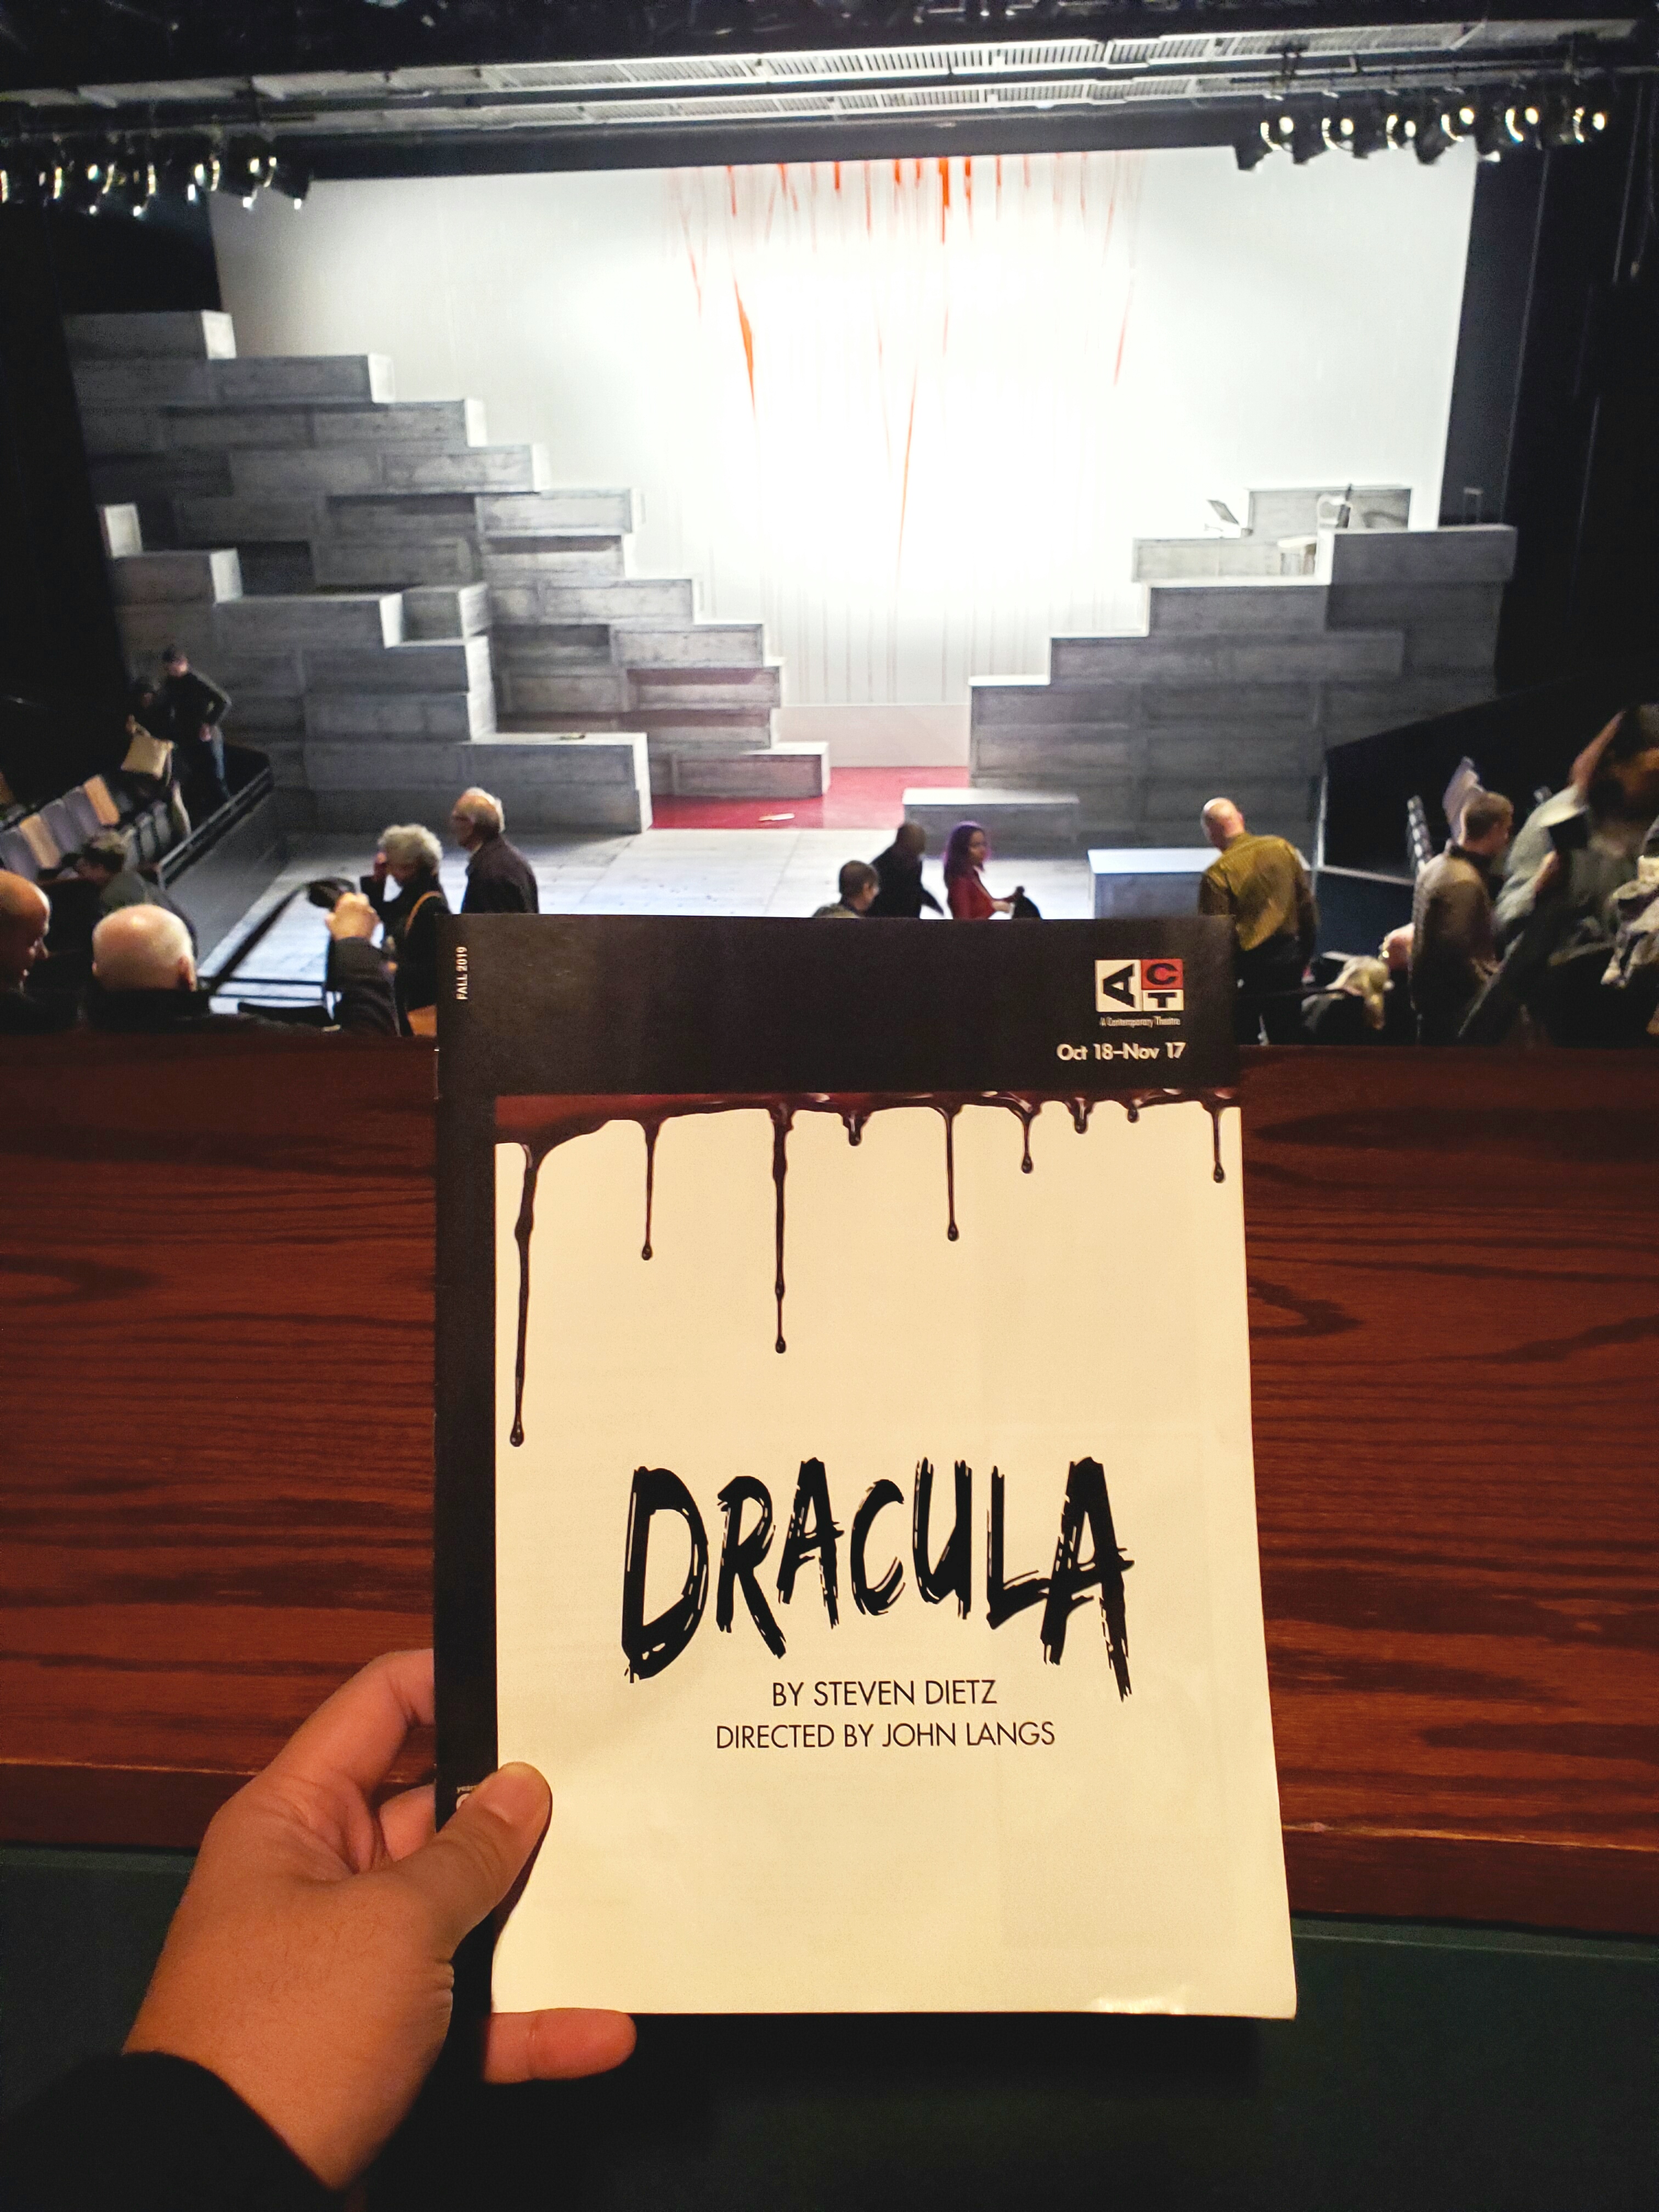 #Dracula stage #play at @ACTTheatre. #Eerie cello & vocalization live music. #Thrilling light effects & scene transitions. Satisfying #vampire lore #Halloween treat. #Transylvania